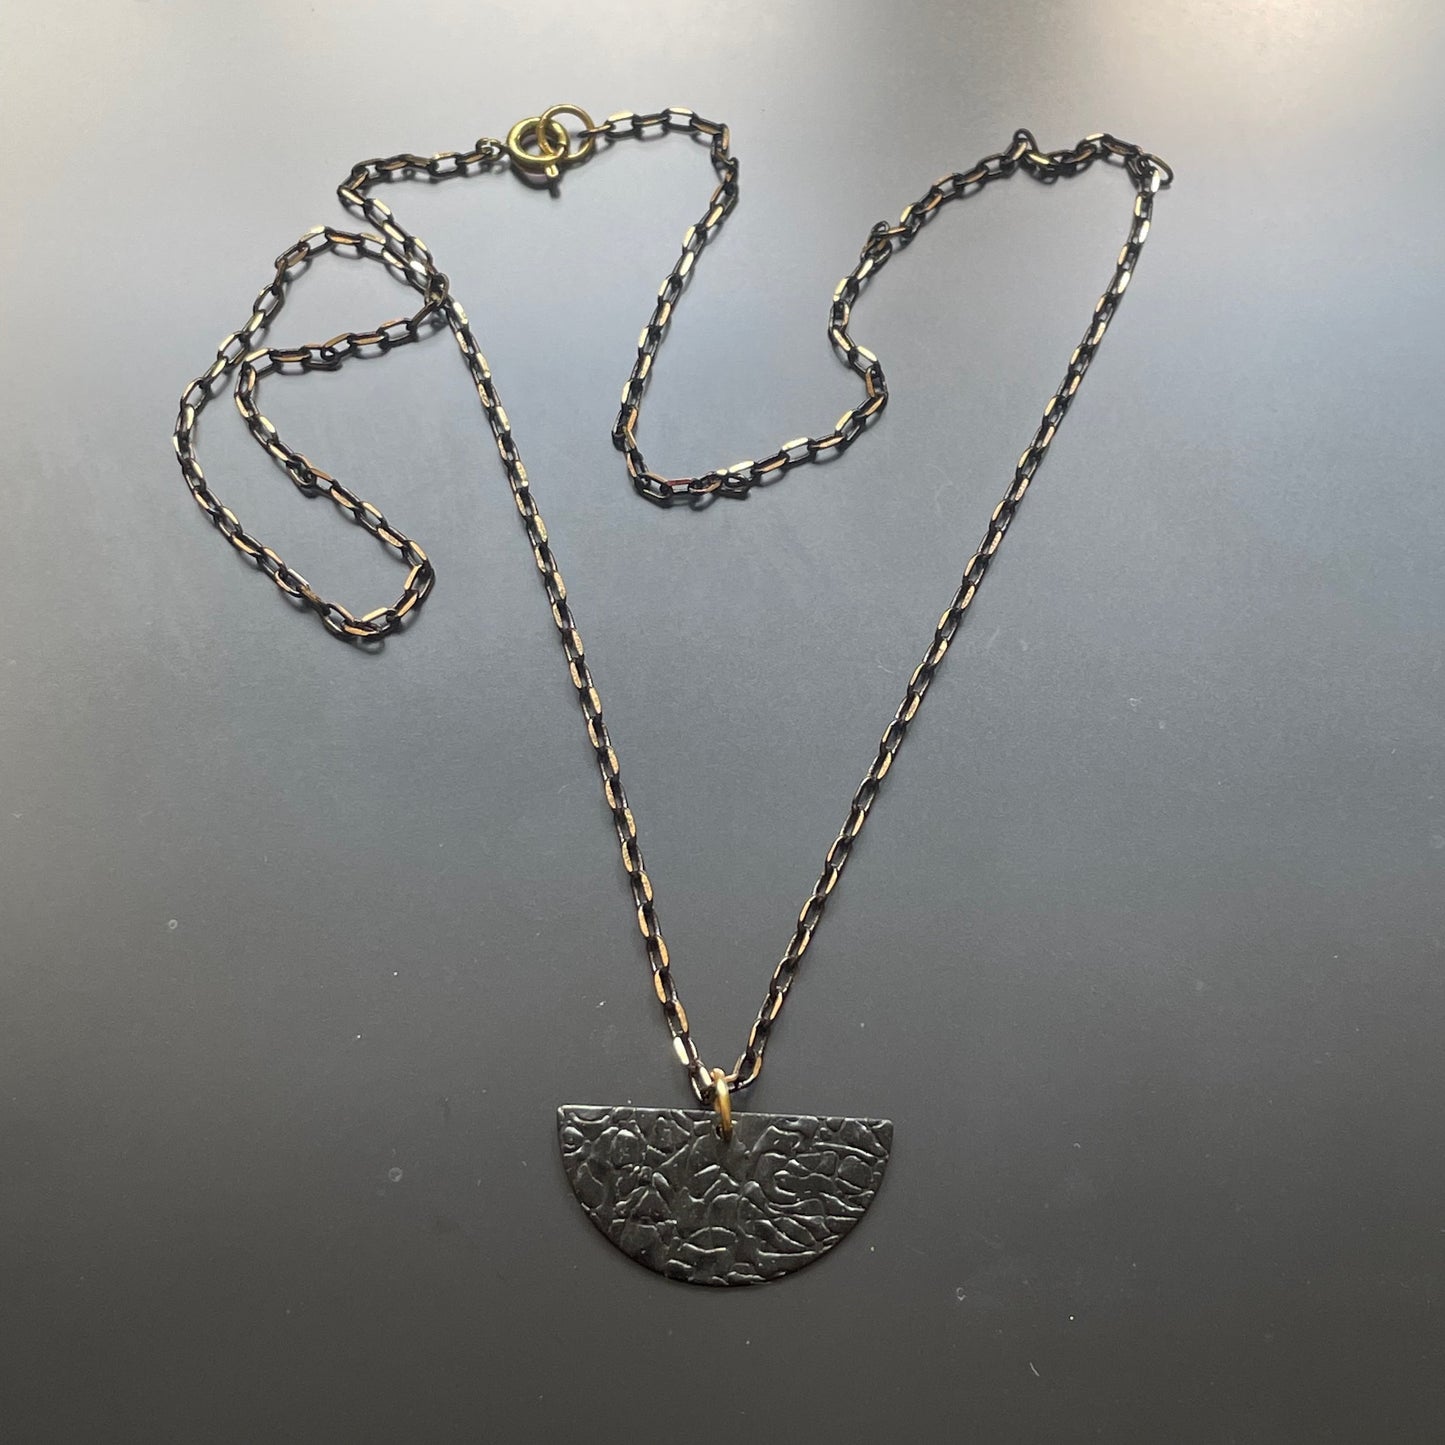 Oxidised Sparkled Brass Necklace with Semi-circle Pendant